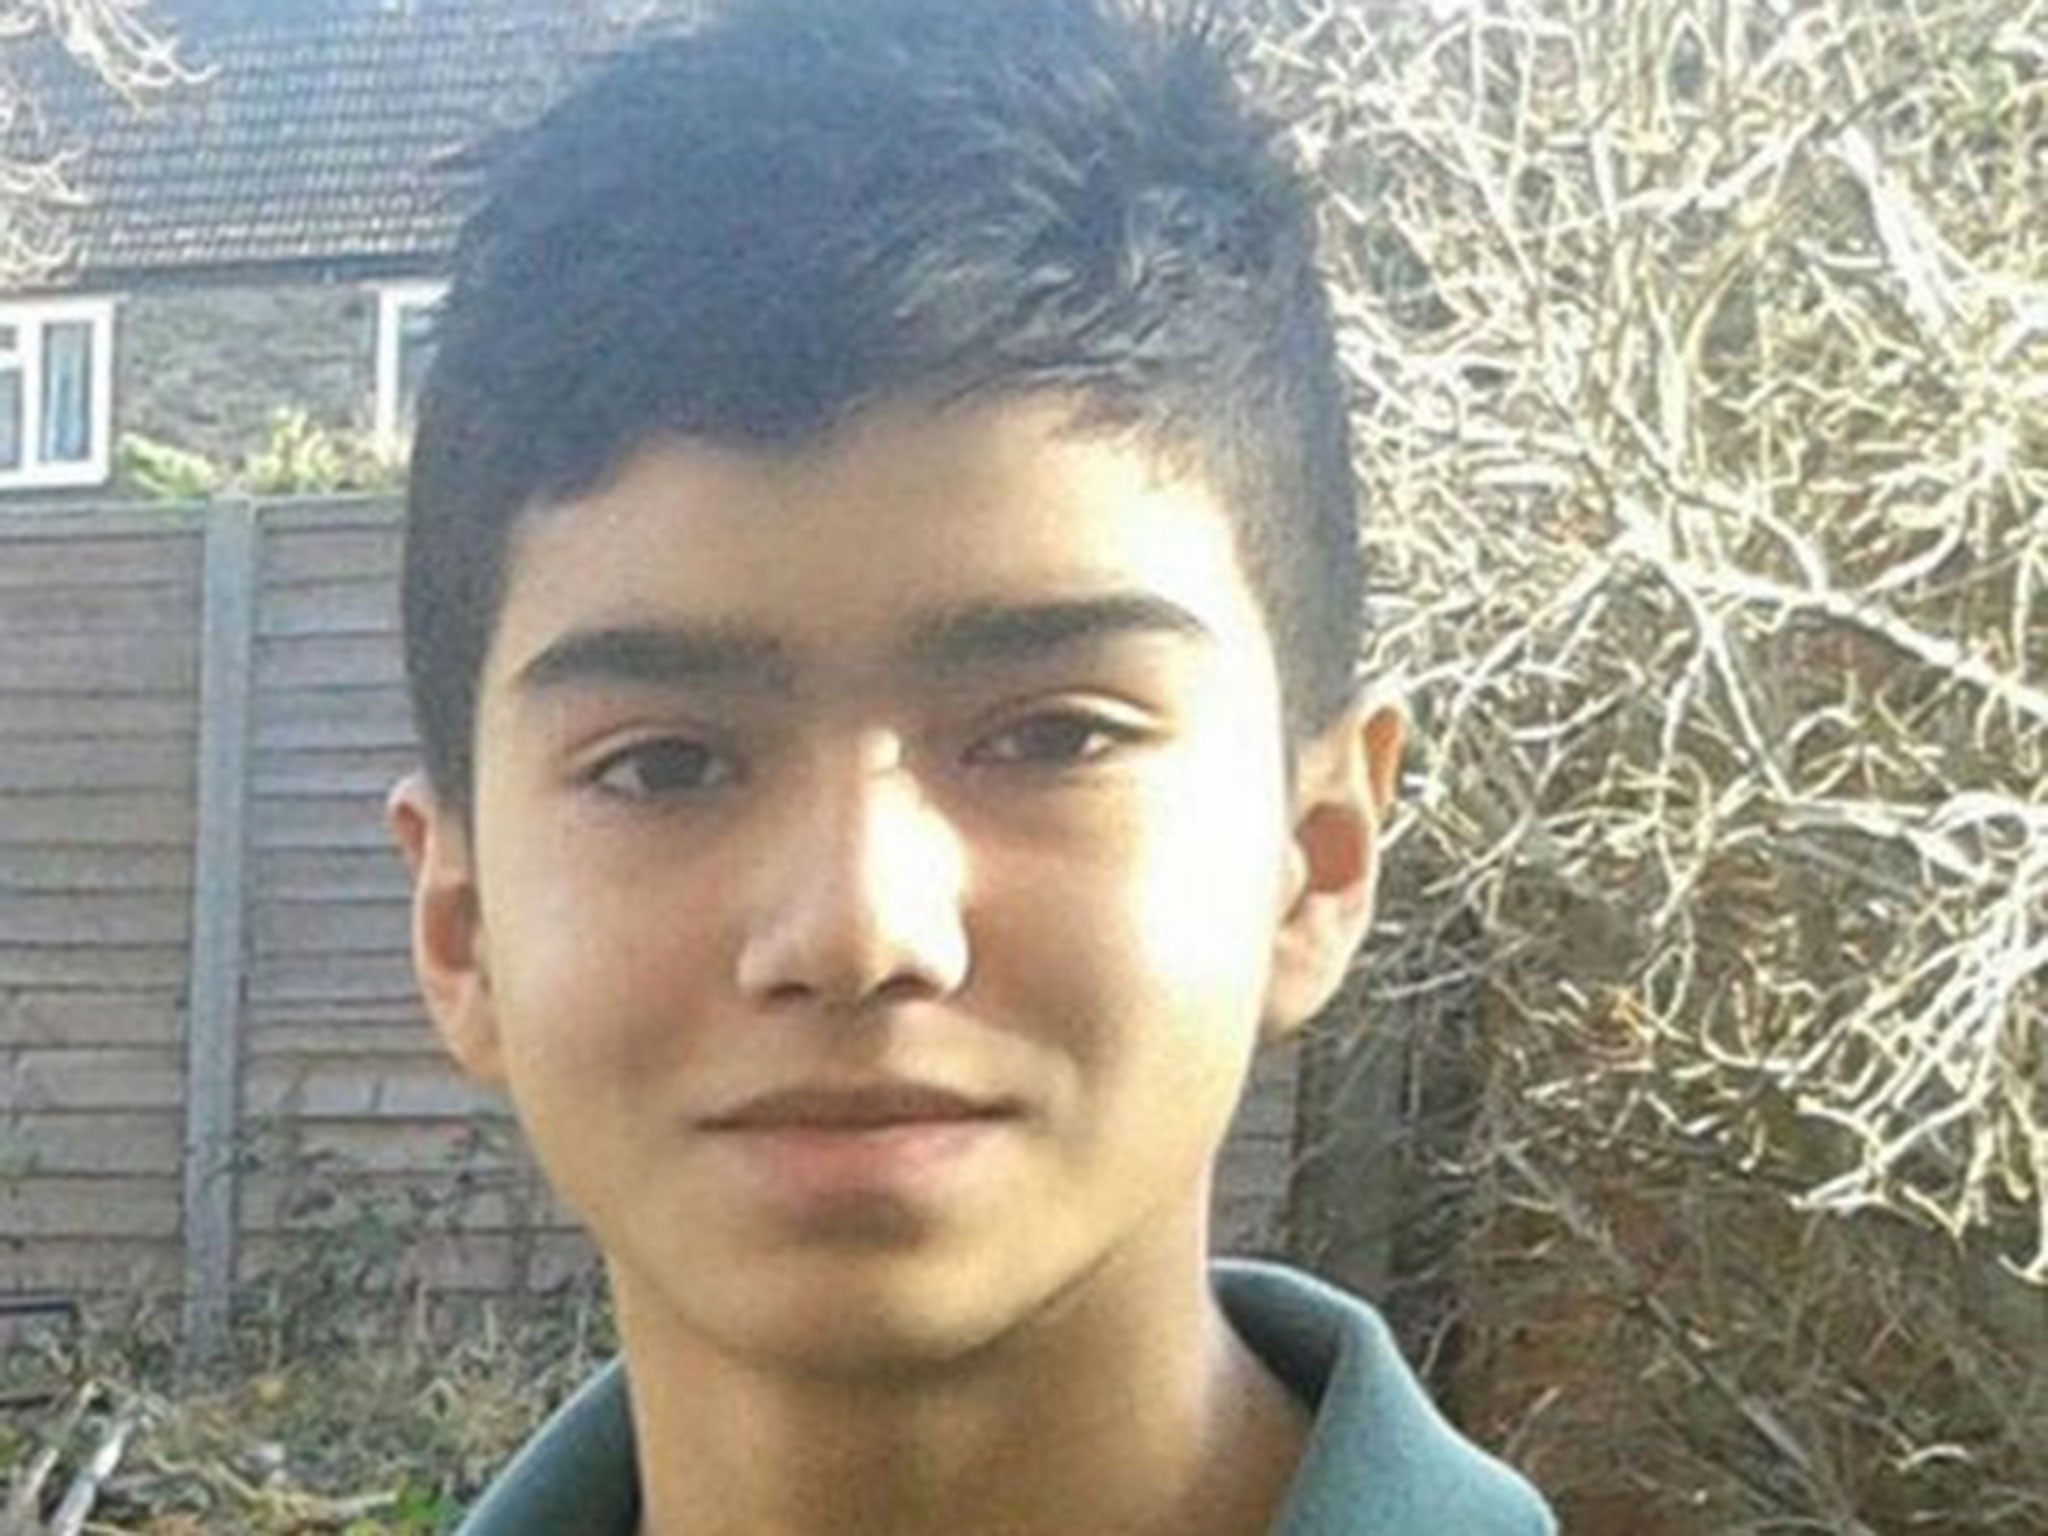 Daniel Pena-Sanchez as his mother has appealed for her unwell teenage son to come home after he ran away following a hospital visit